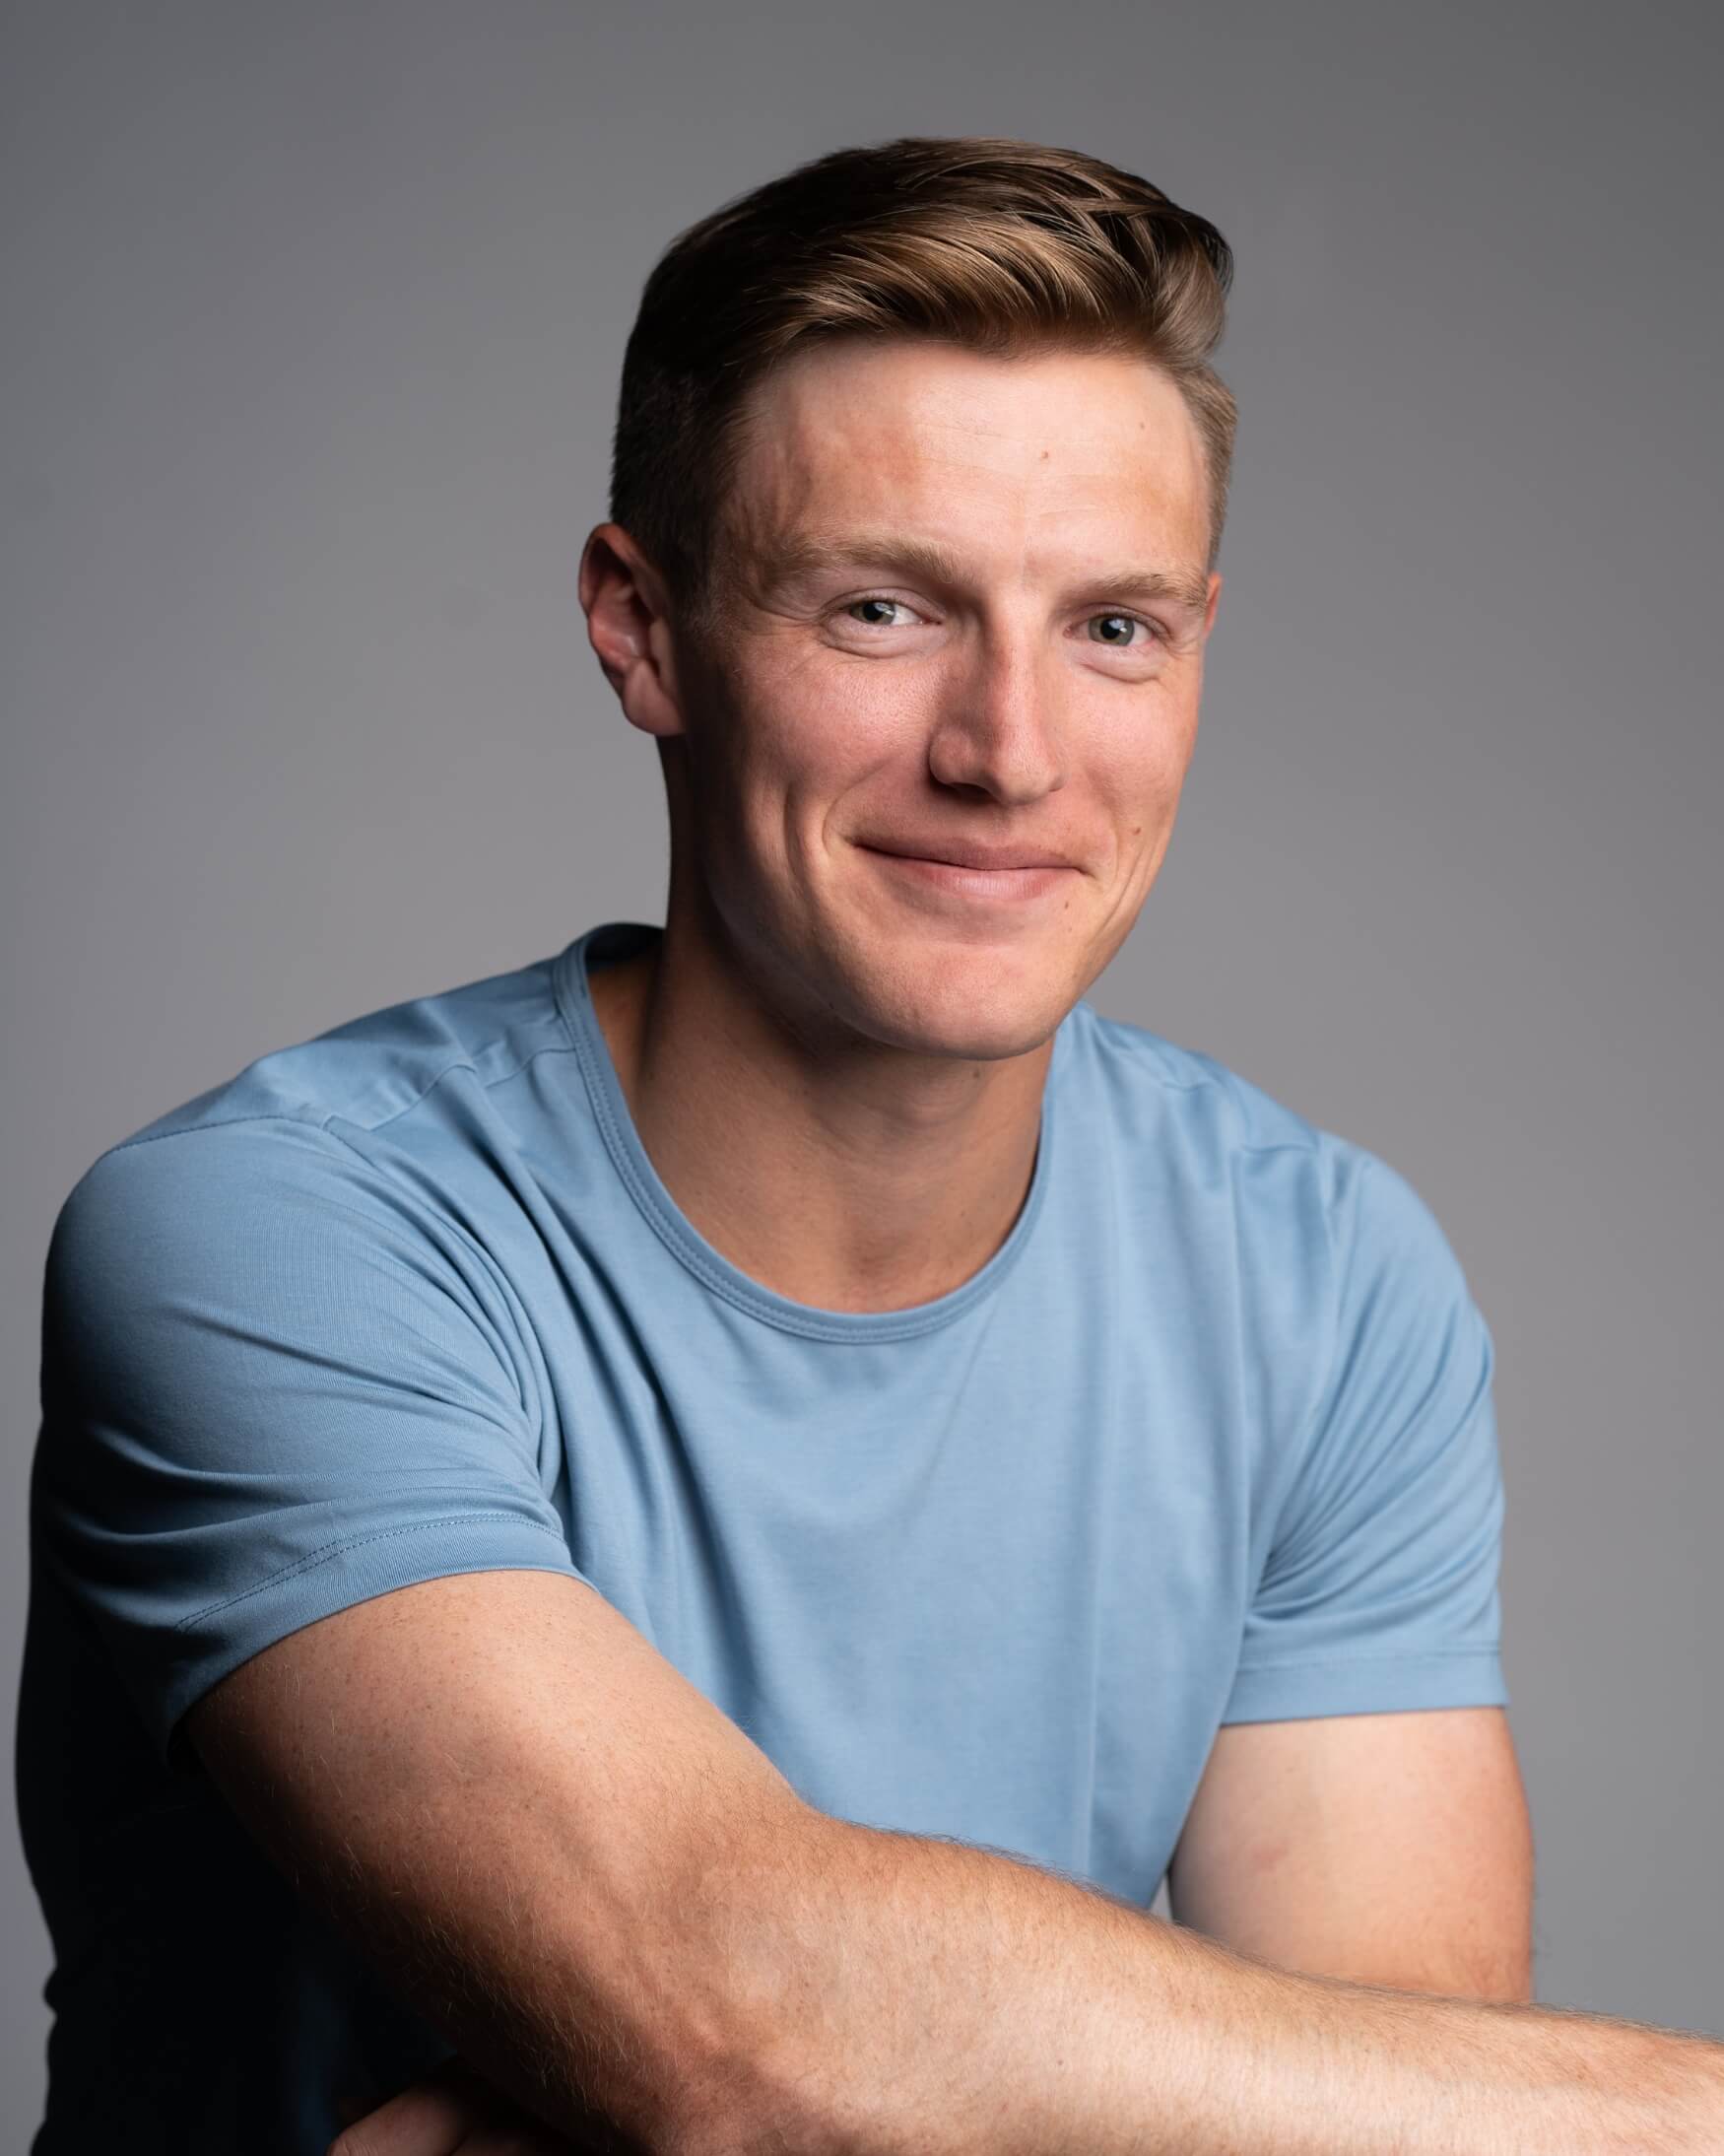 acting headshot photography example in studio with light blue shirt